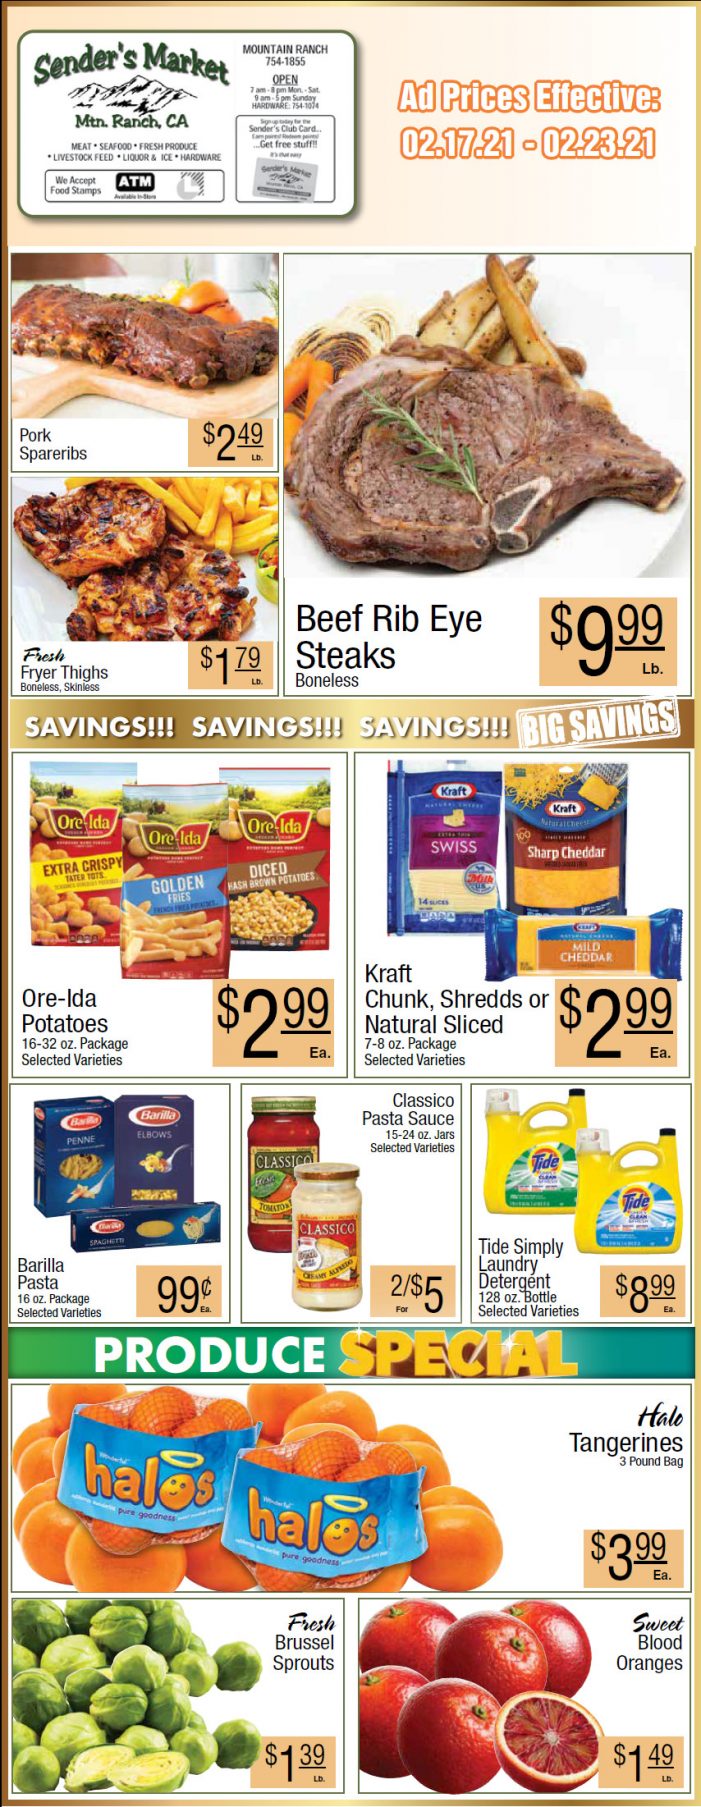 Sender’s Market’s Weekly Ad & Grocery Specials Through February 23rd!  Shop Local & Save!